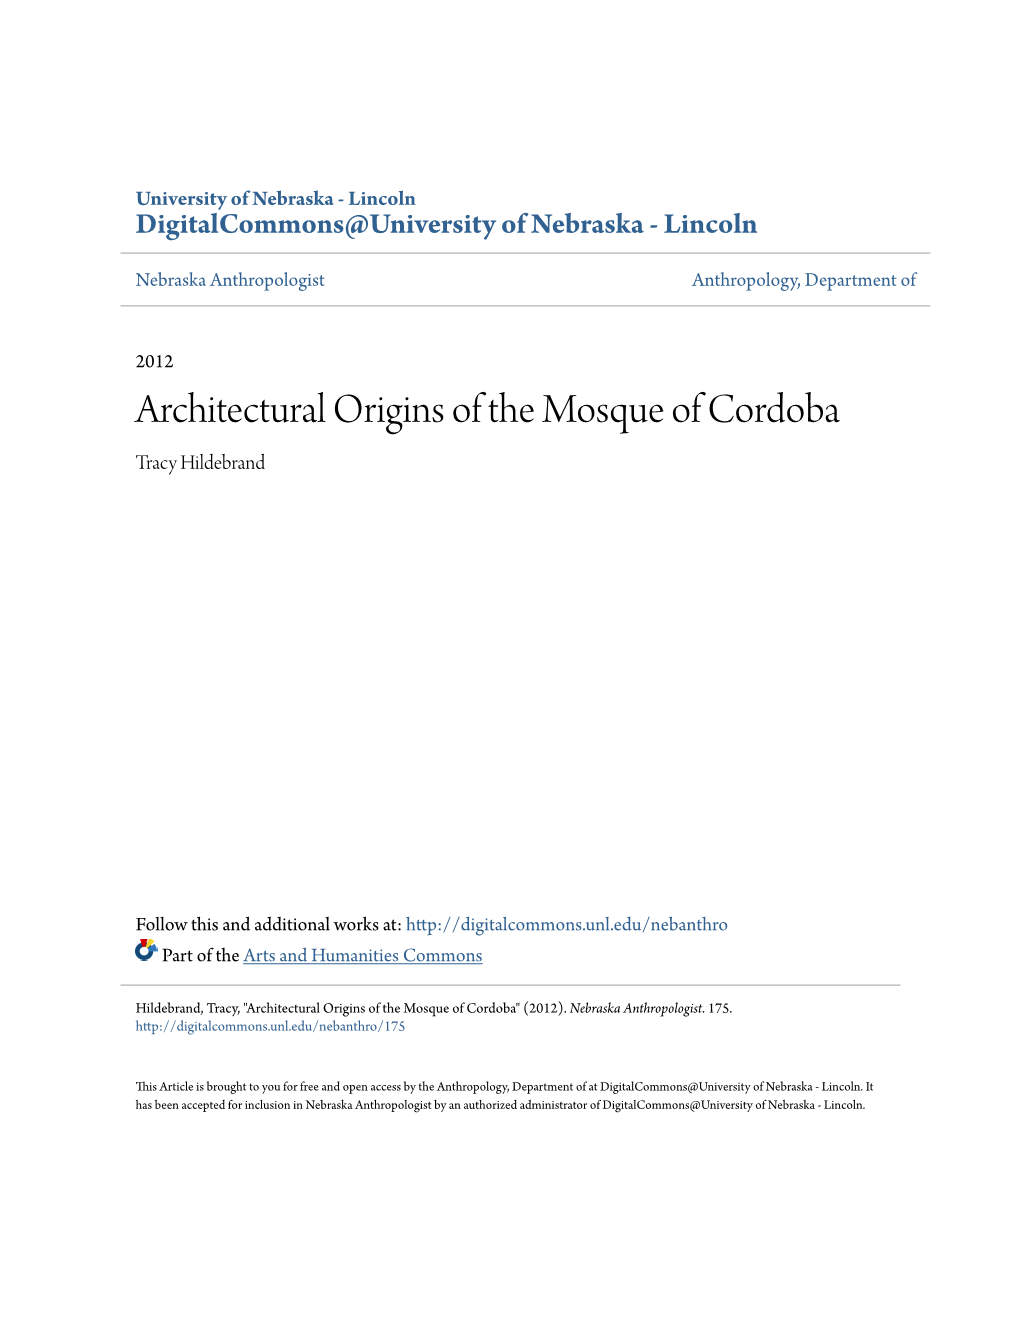 Architectural Origins of the Mosque of Cordoba Tracy Hildebrand